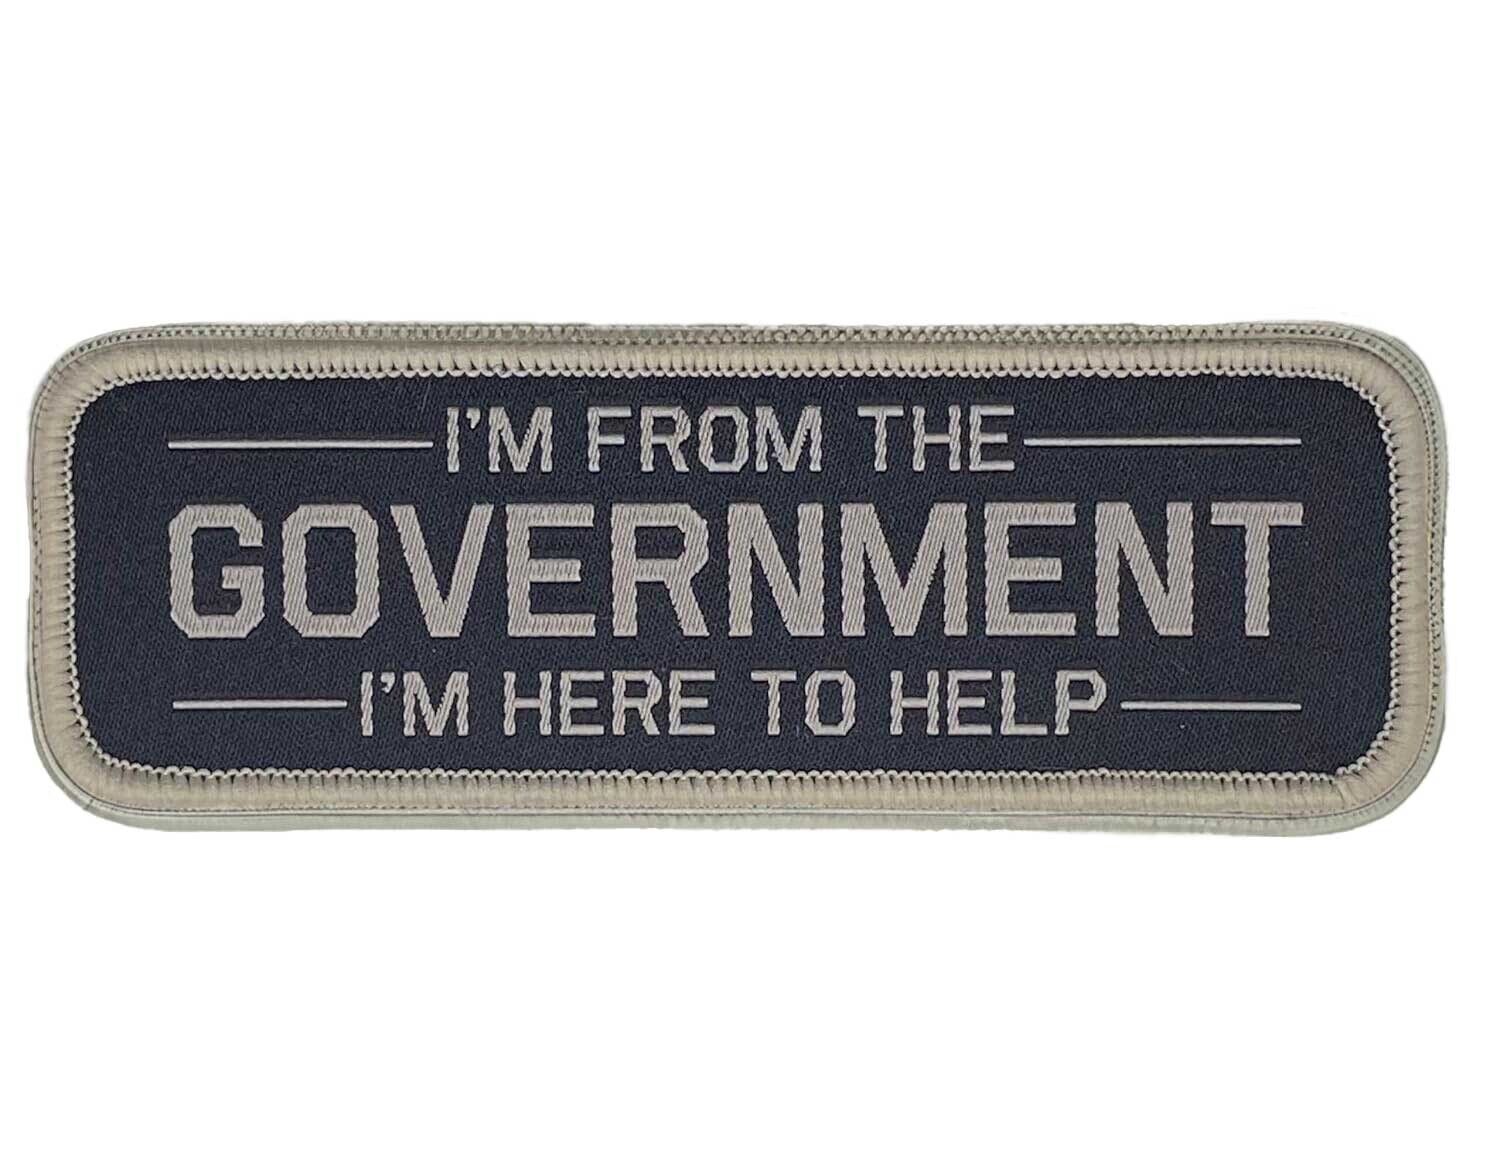 I'm From The Government, I'm Here to Help - Woven Morale Patch with Hook Backing